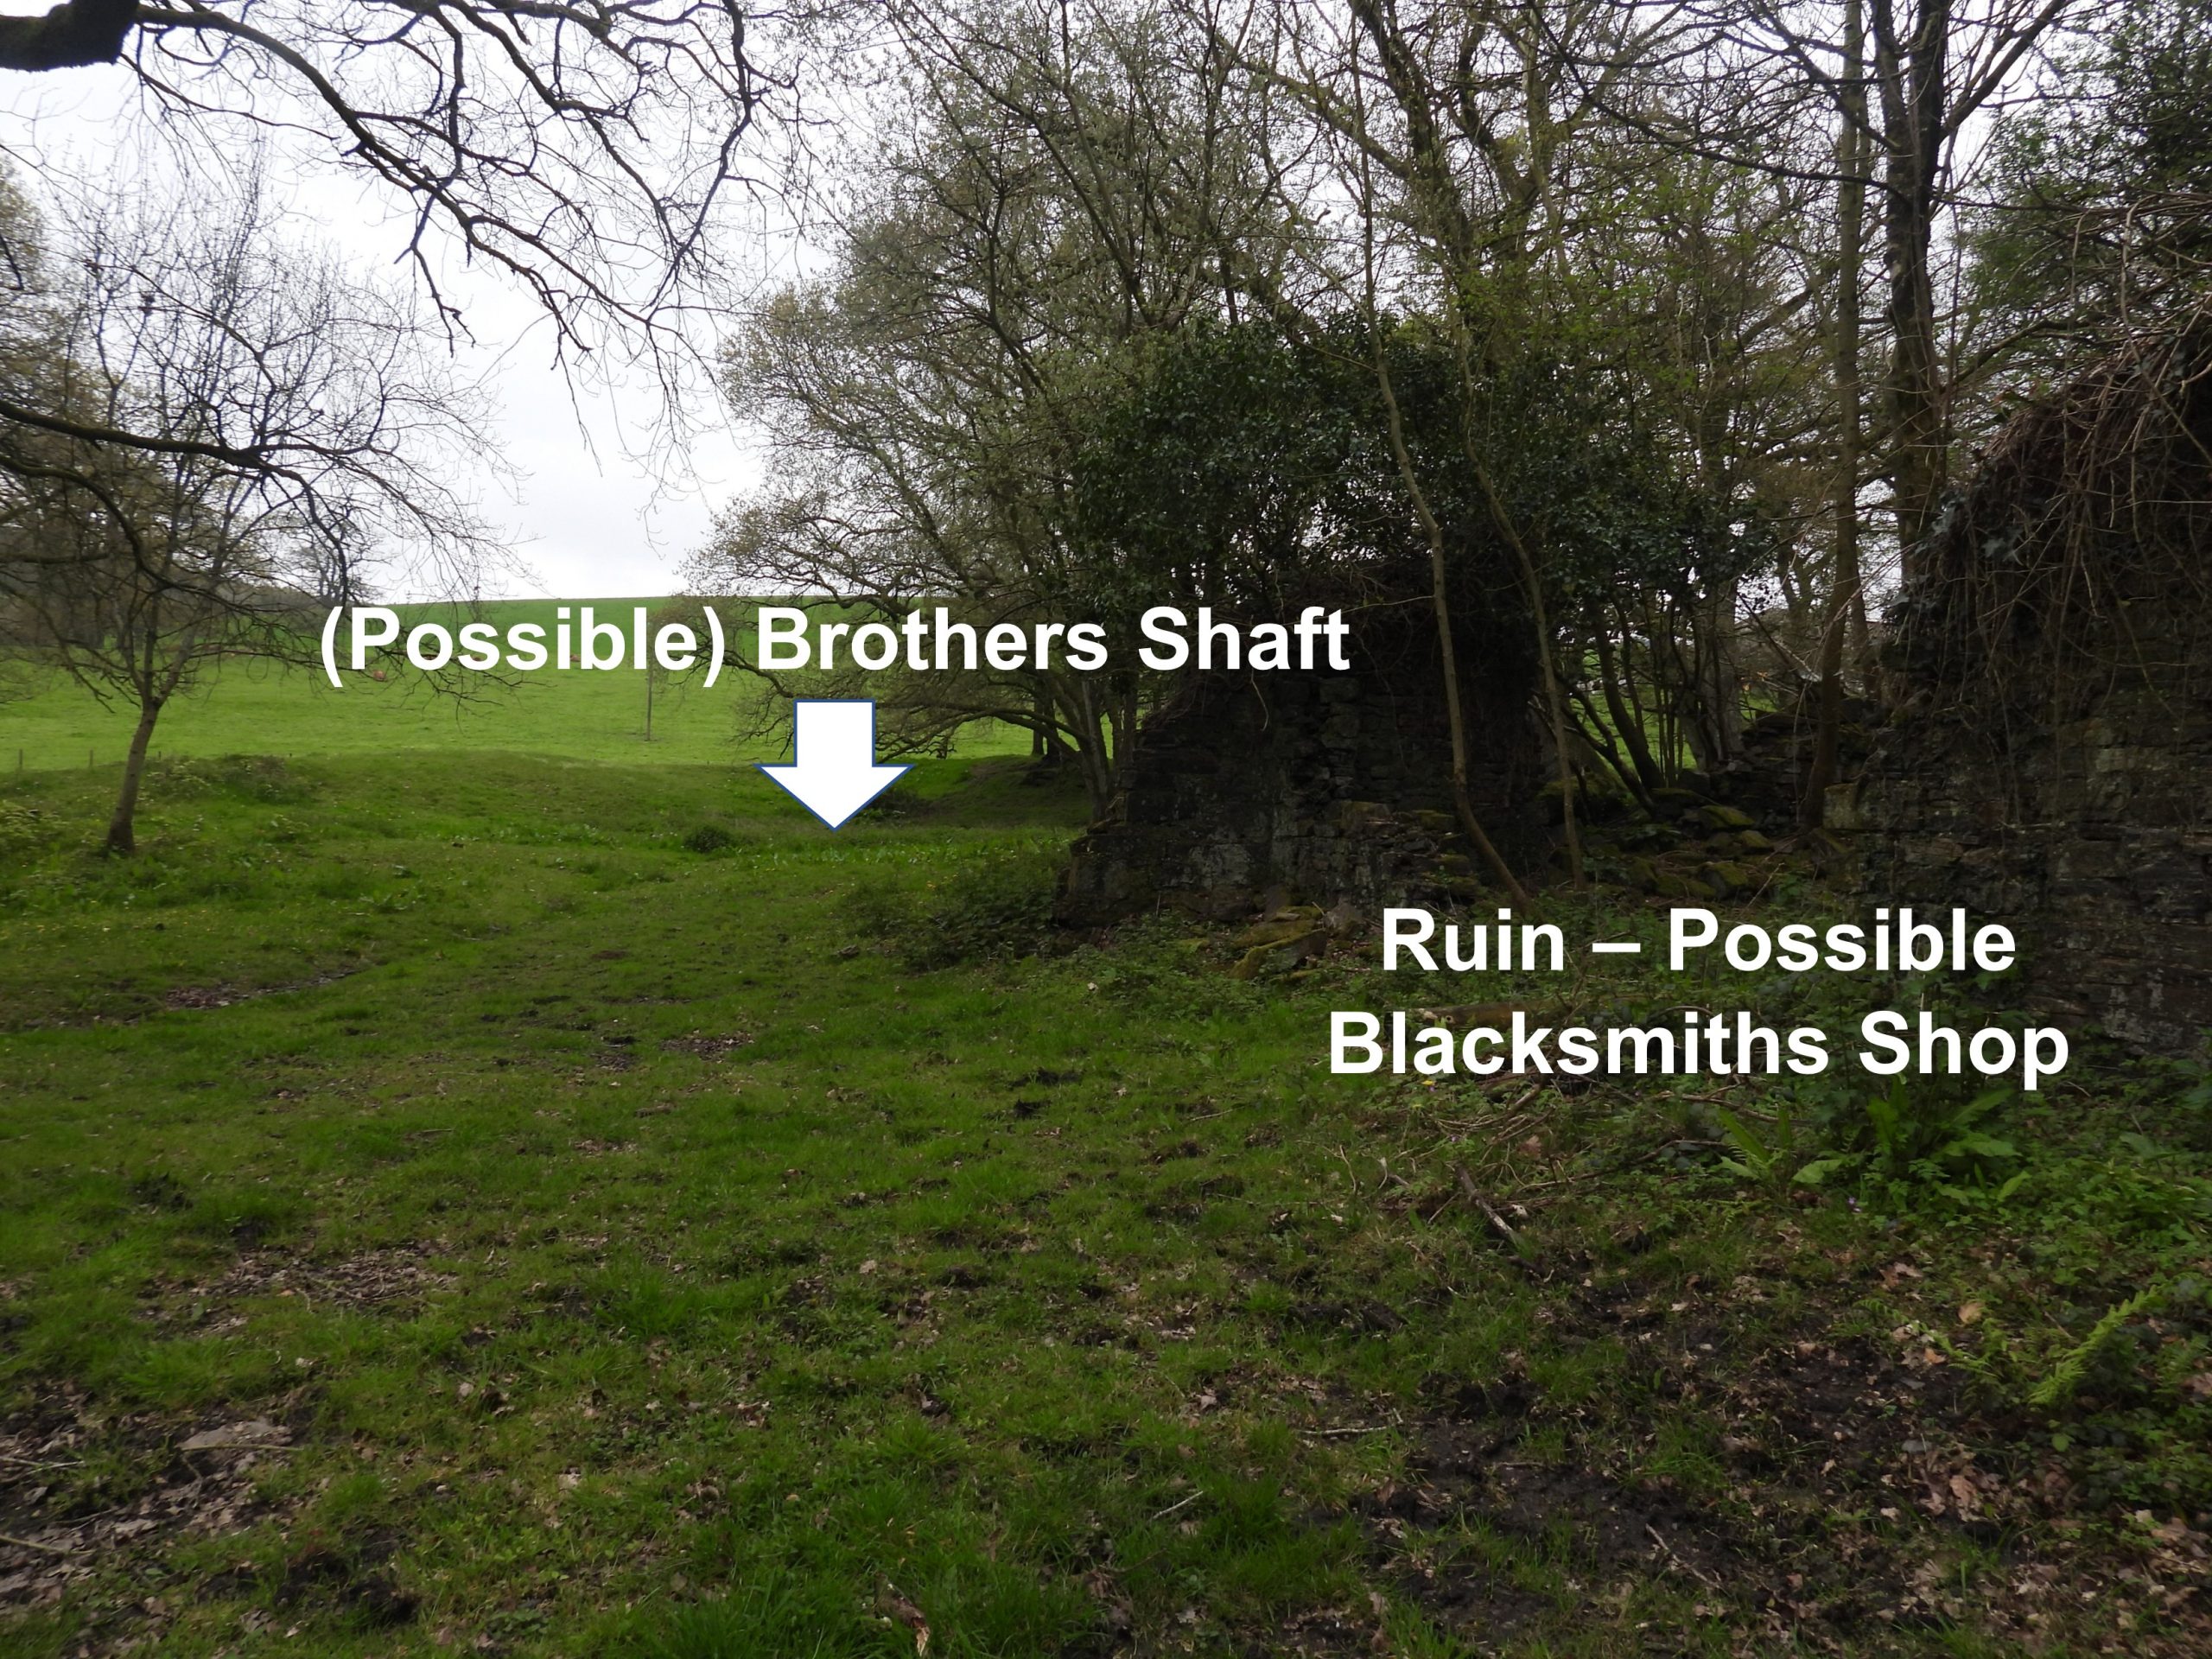 13. Smithy and Brothers Shaft